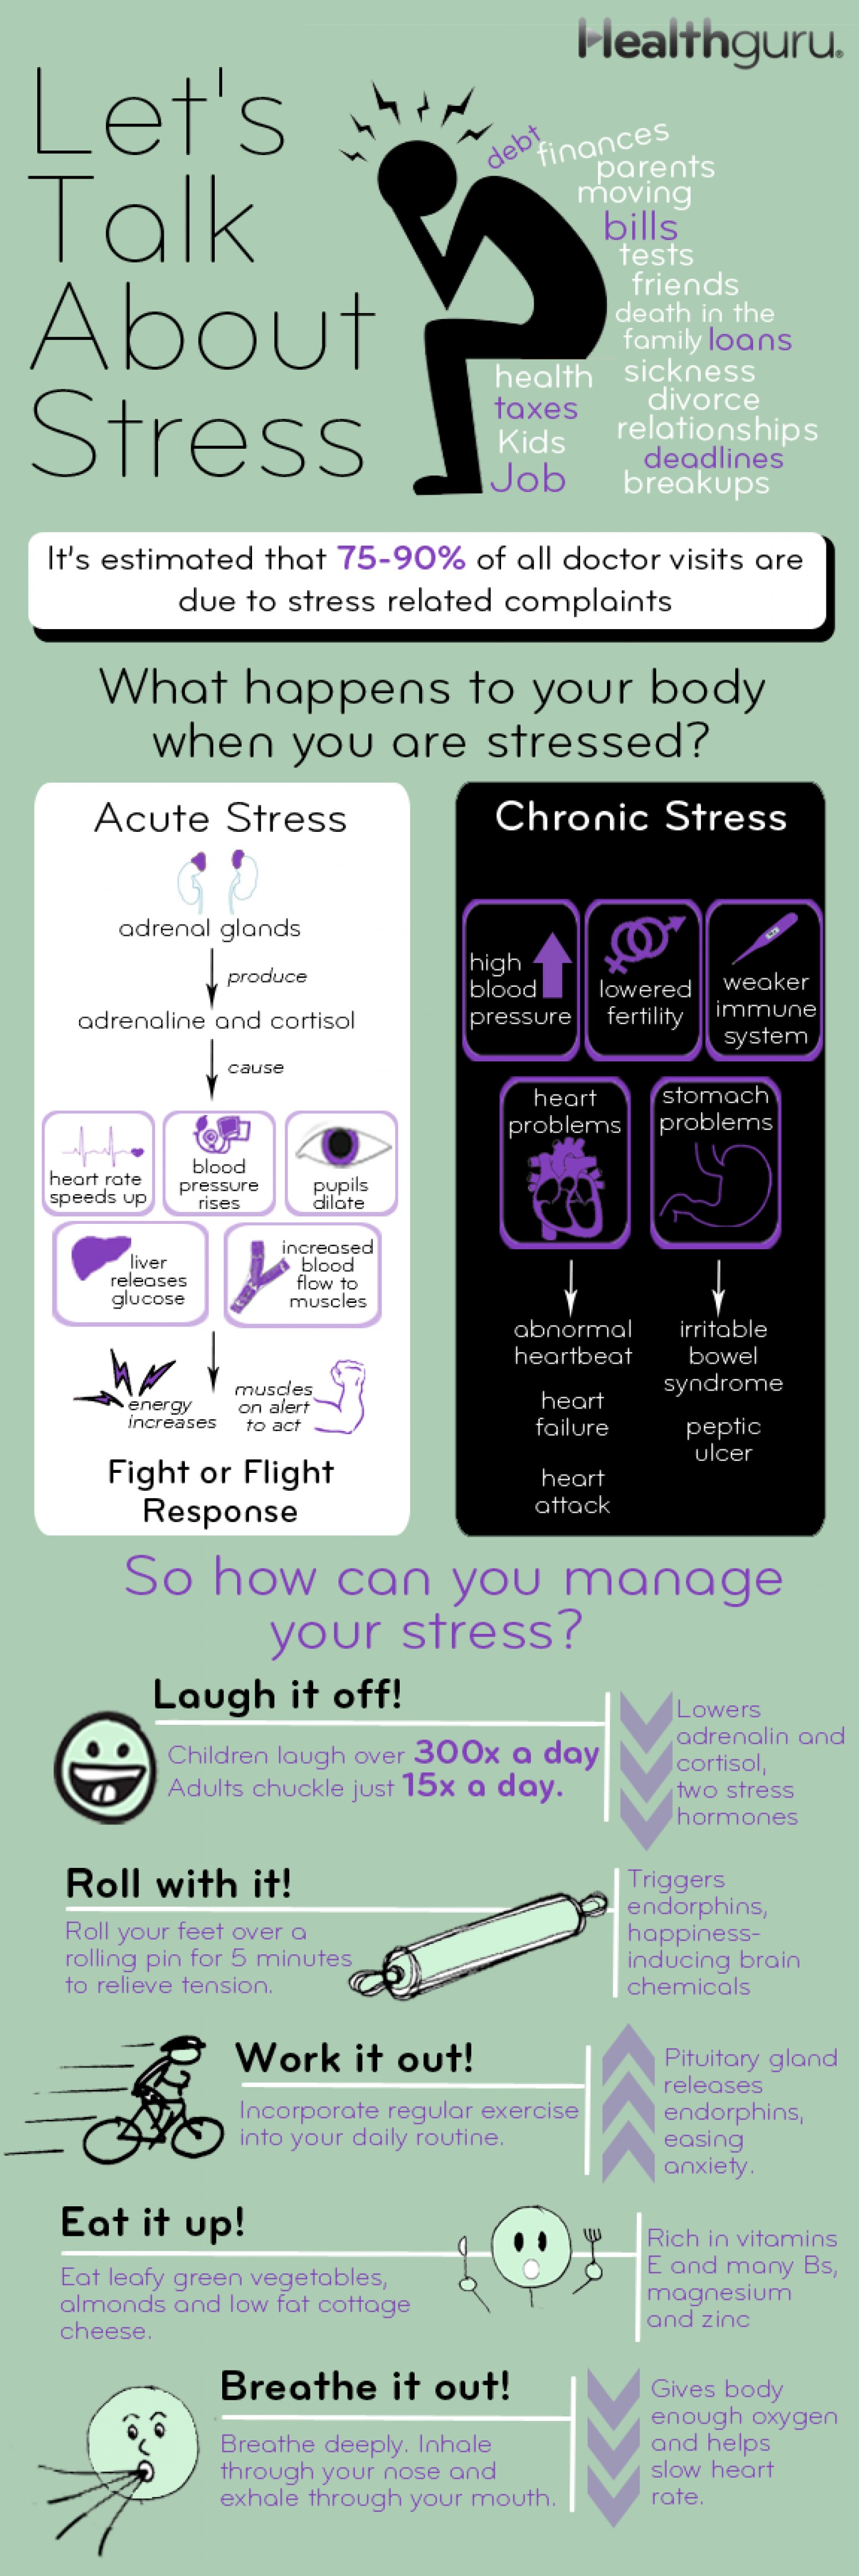 let's talk about stress